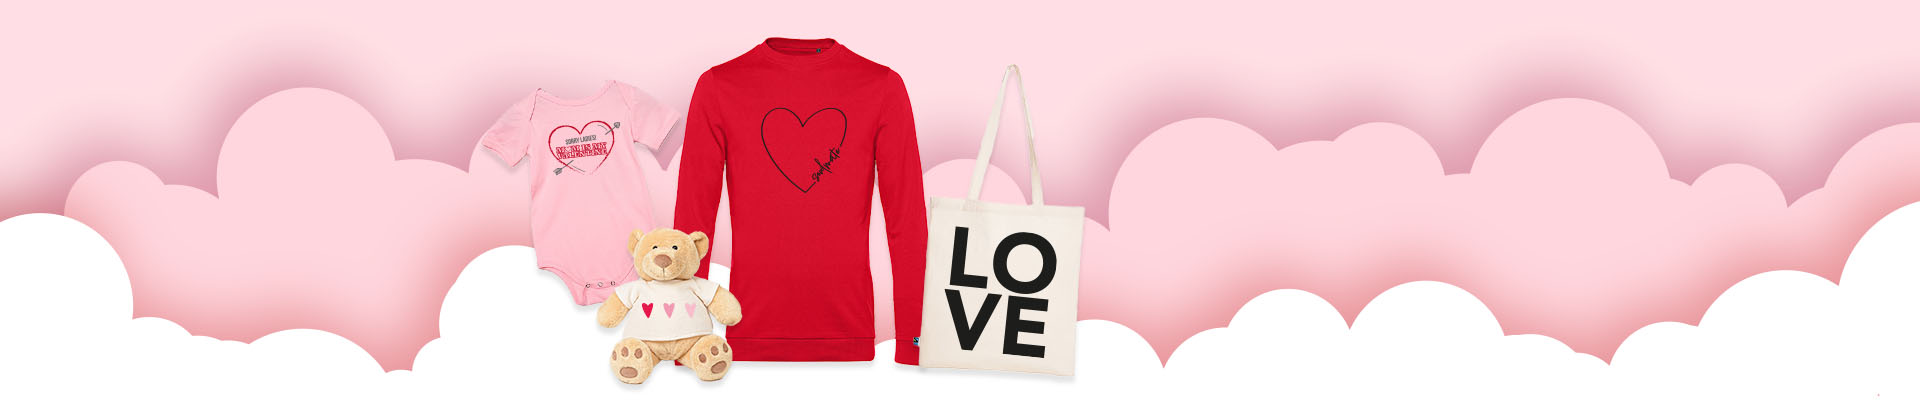 The new print motifs for Valentine's Day are here!